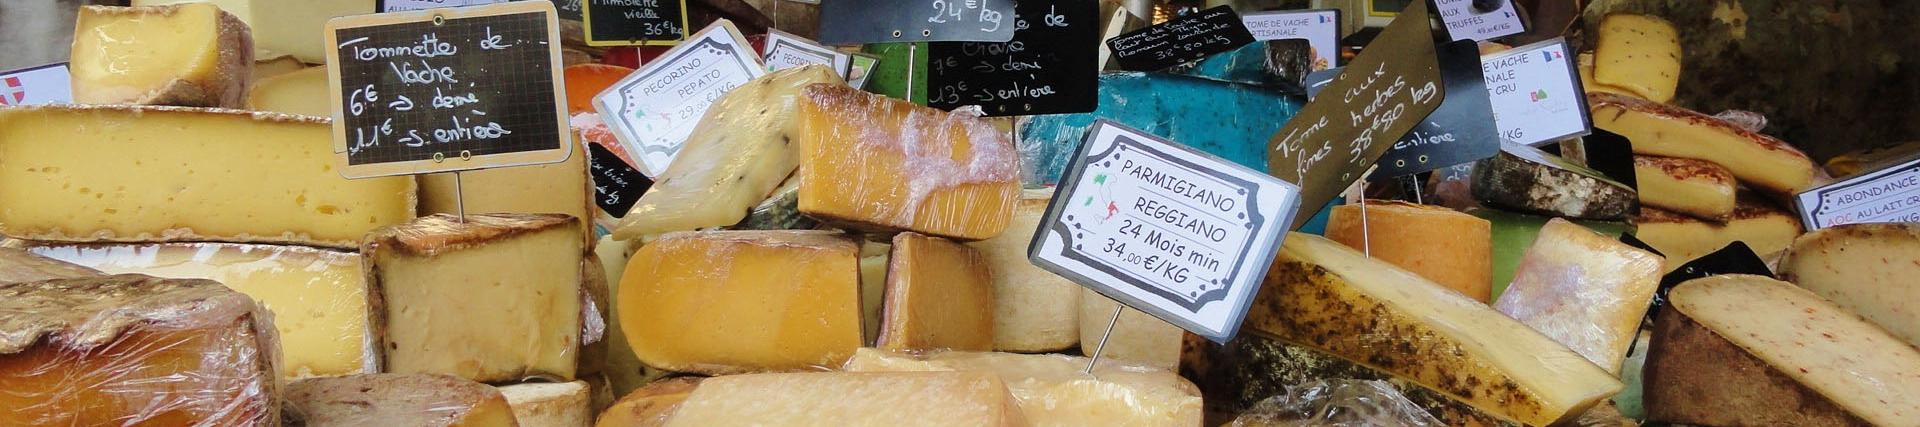 A selection of cheeses on display in a French market